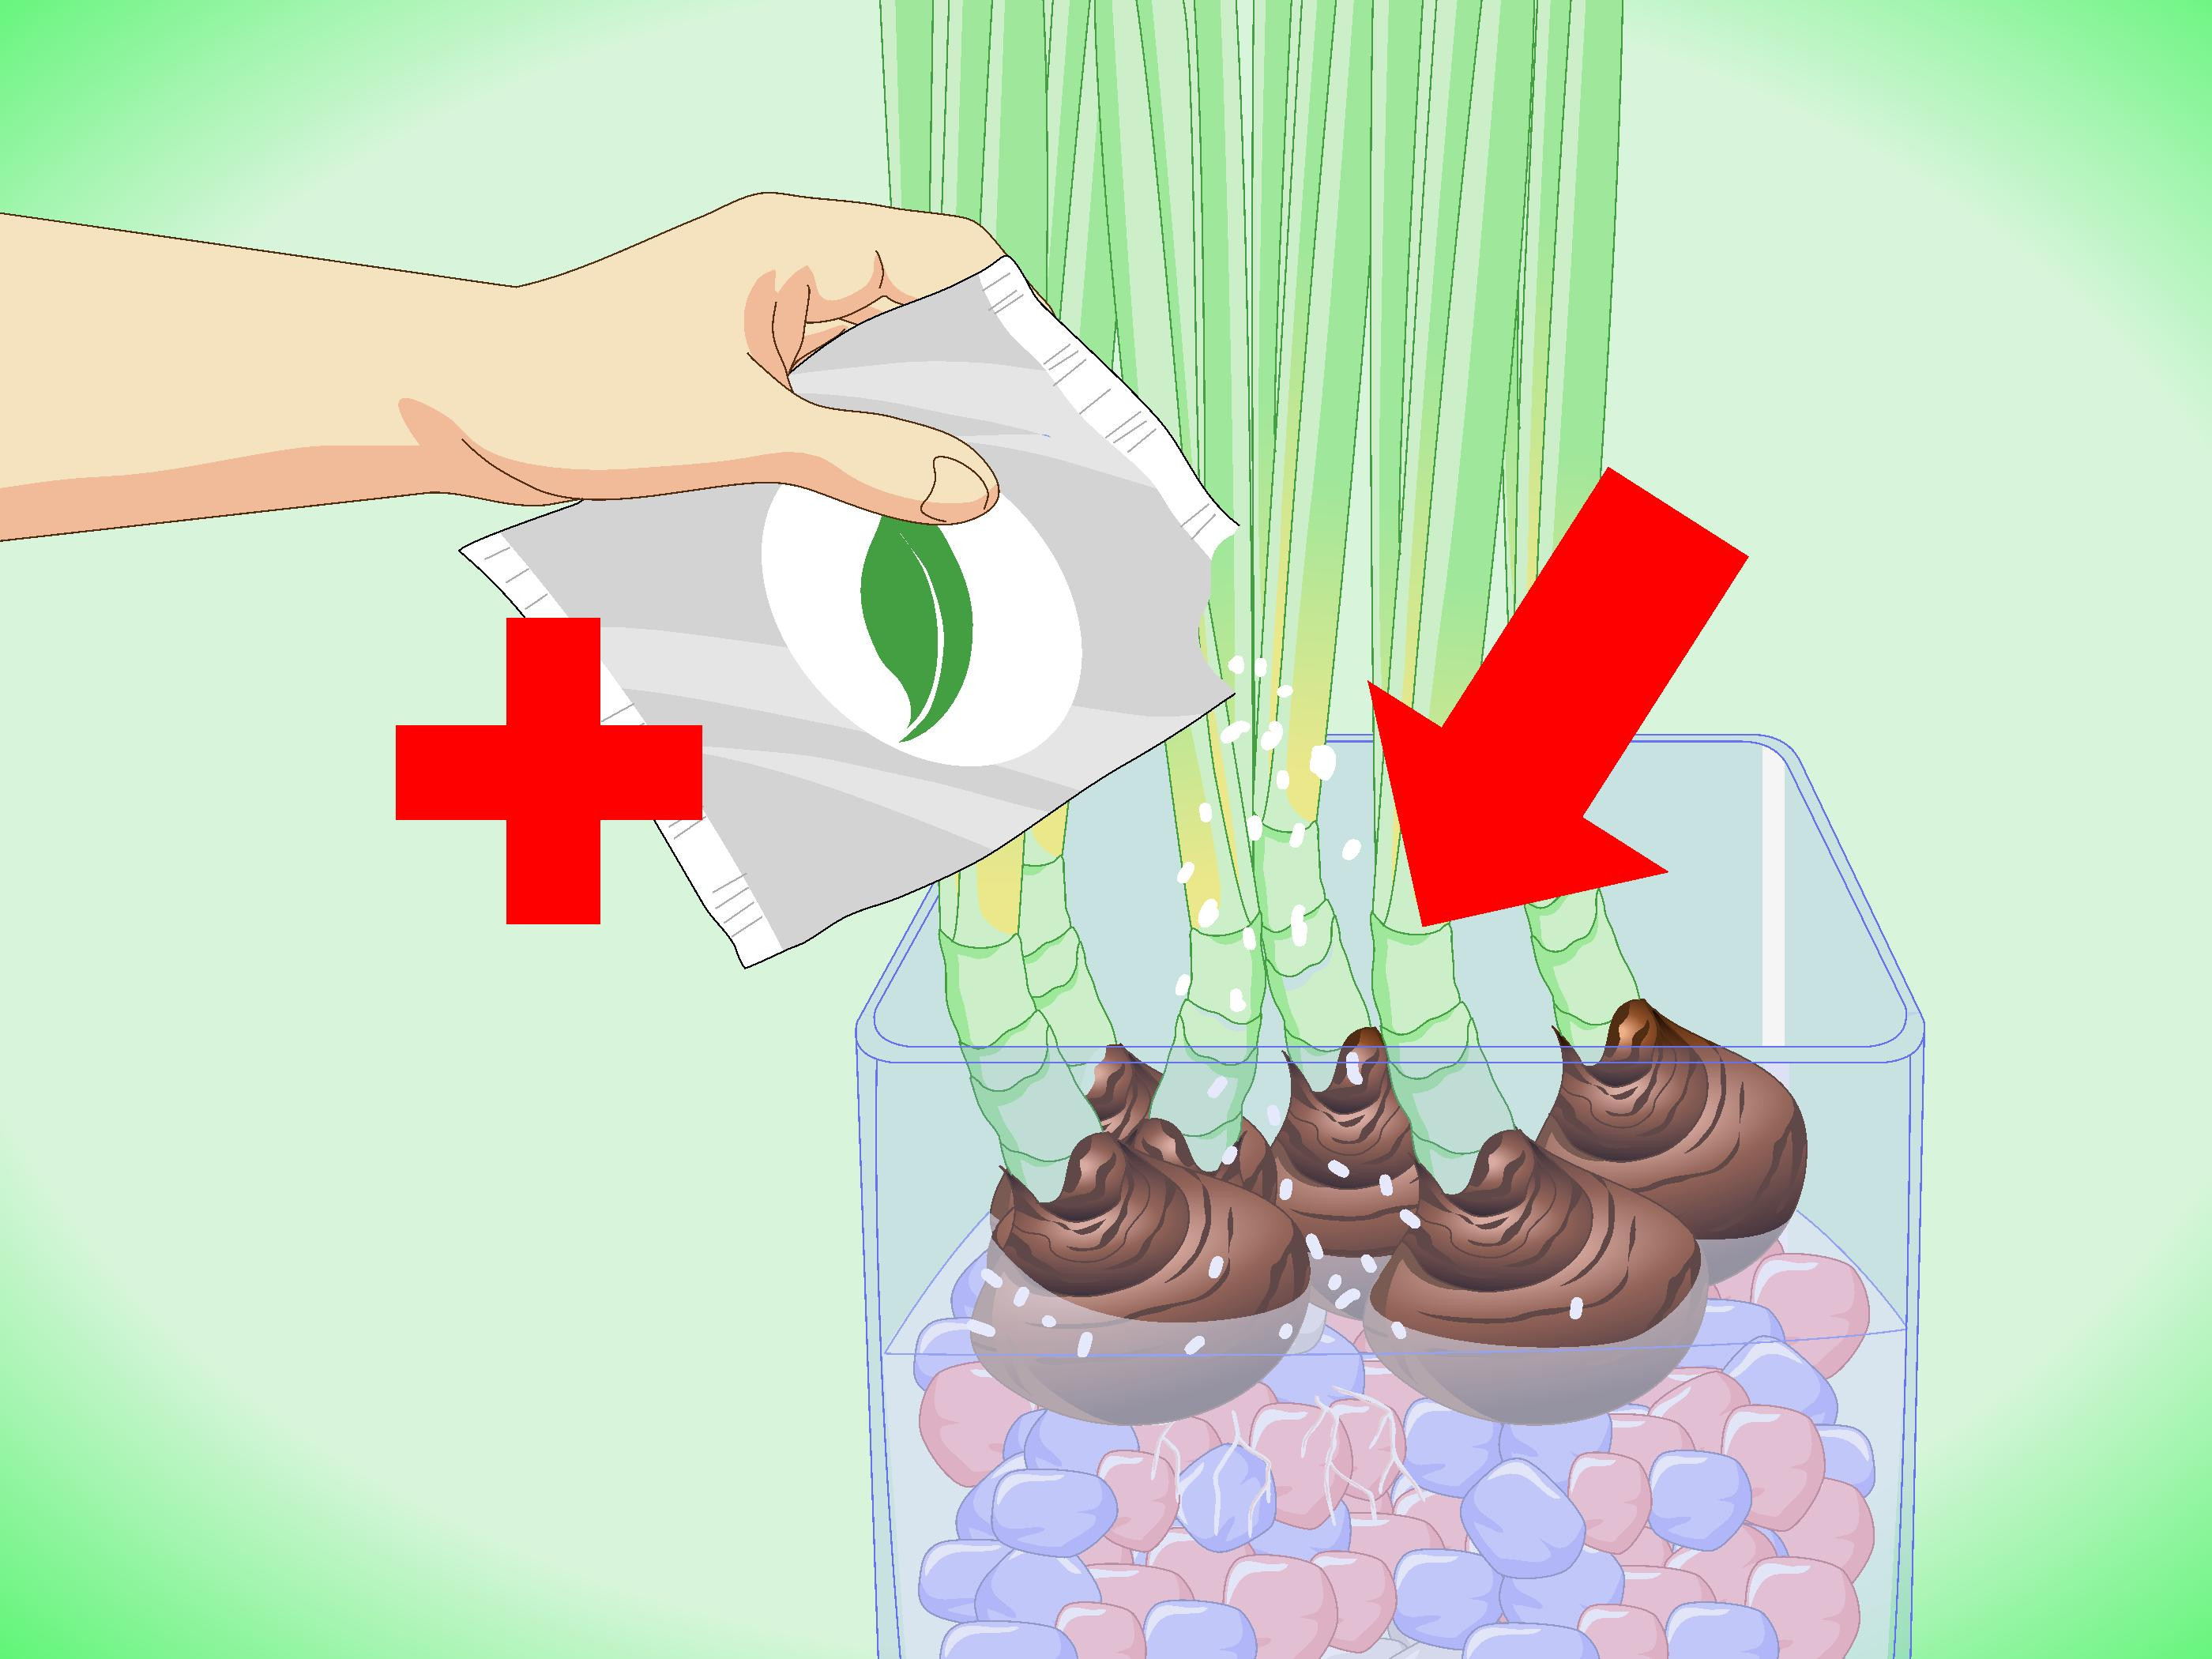 19 Perfect Bulb forcing Vases for Sale 2024 free download bulb forcing vases for sale of how to force paperwhite narcissus bulbs with pictures wikihow regarding force paperwhite narcissus bulbs step 16